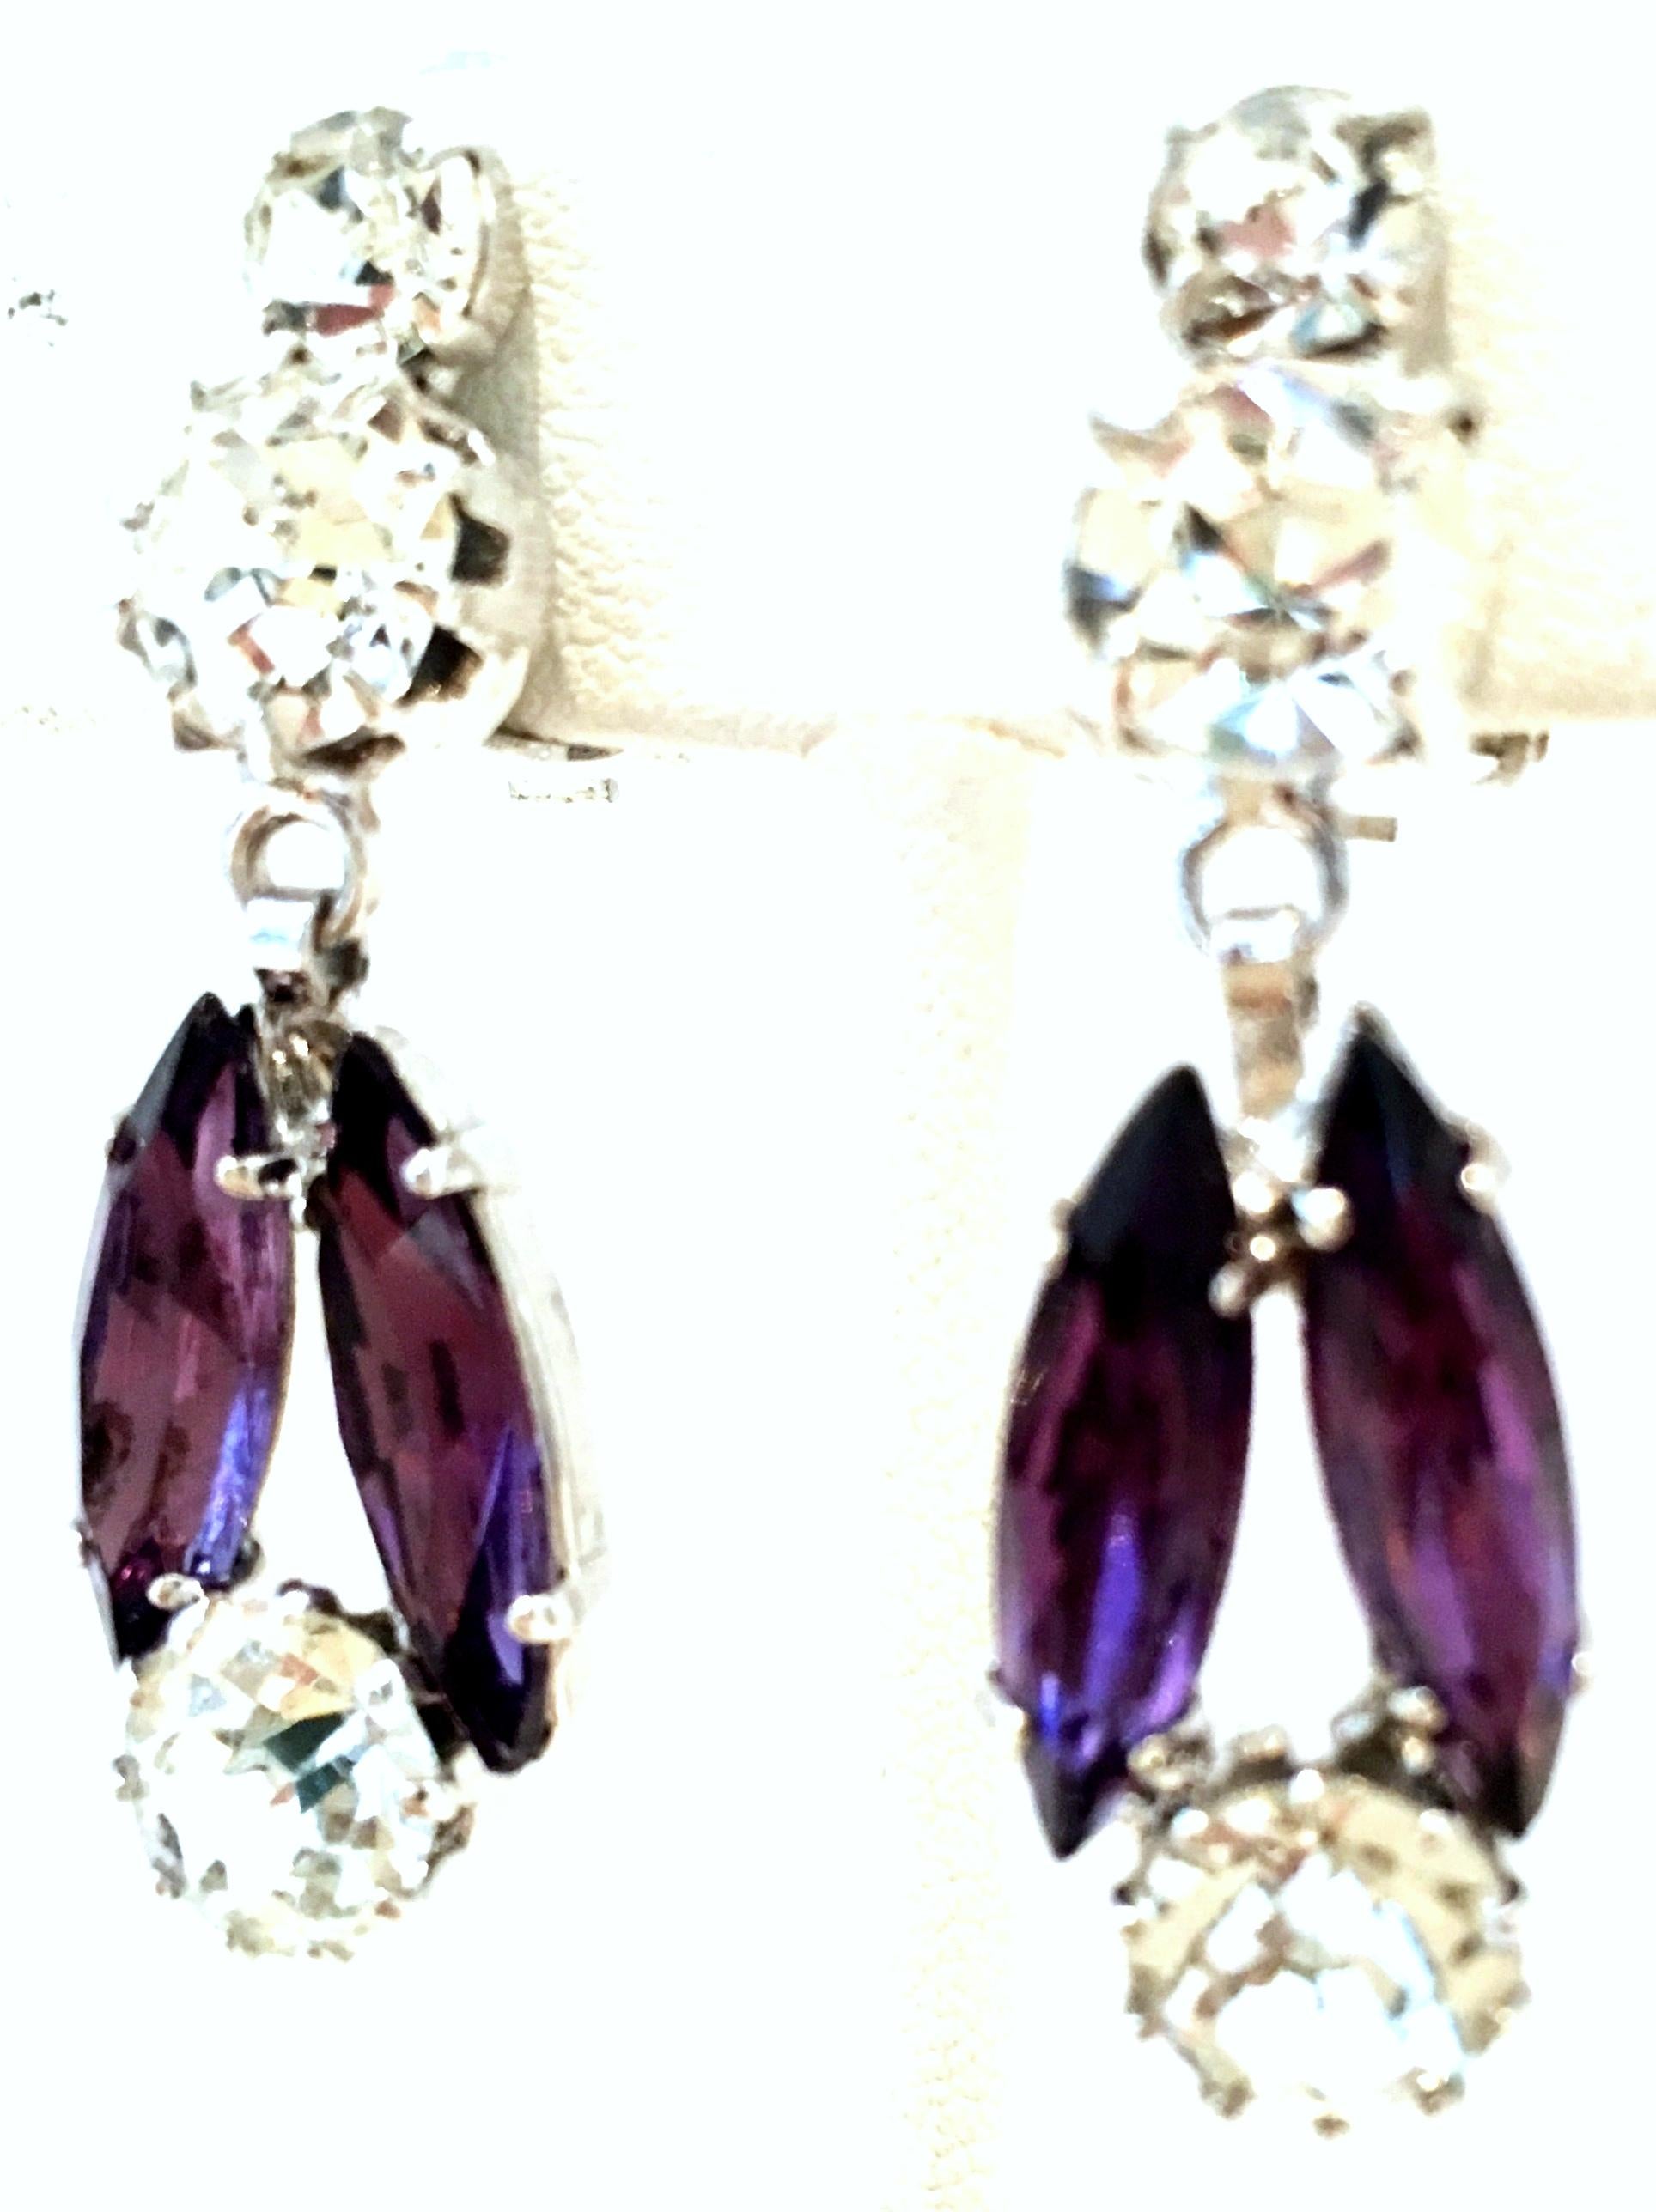 20th Century Pair Of Silver & Swarovski Amethyst Crystal Dangle Earrings. These silver plate clip style drop earrings have the highest quality of brilliant cut and faceted Swarovski crystal stones, fancy prong set in deep amethyst and colorless tone.